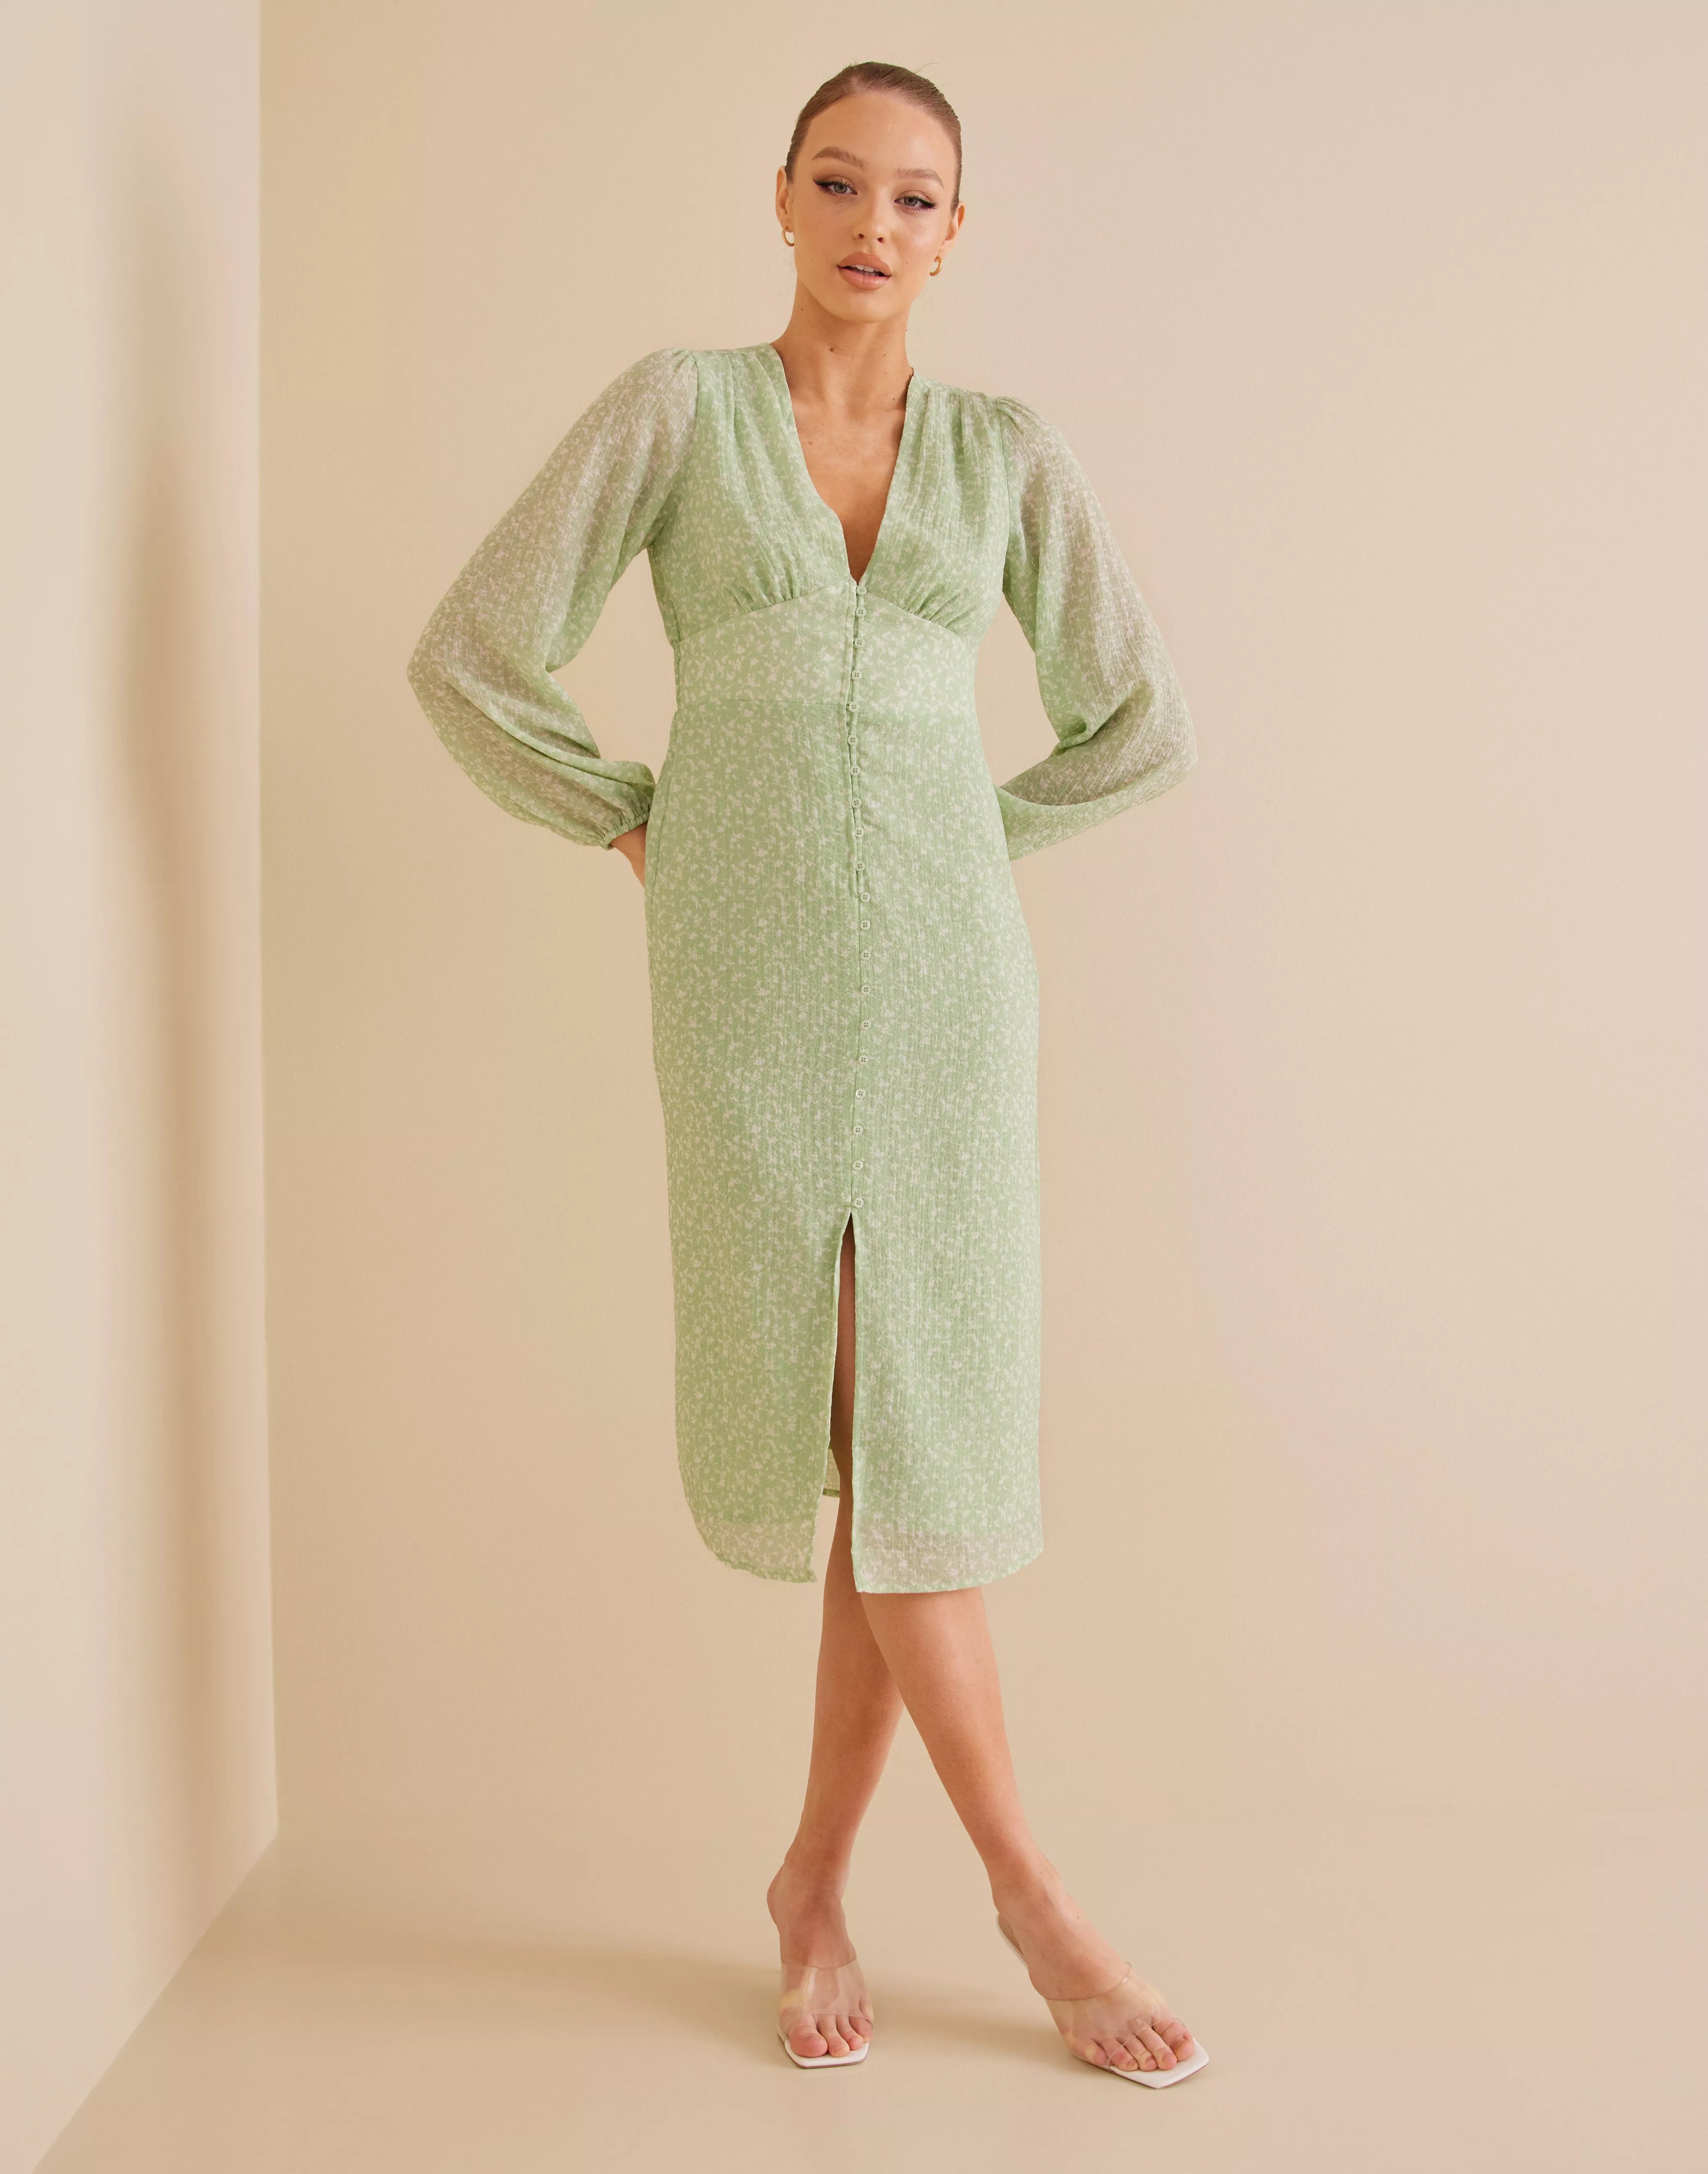 Skru ned Accord mulighed Køb Gina Tricot Mindy button down dress - Green | Nelly.com